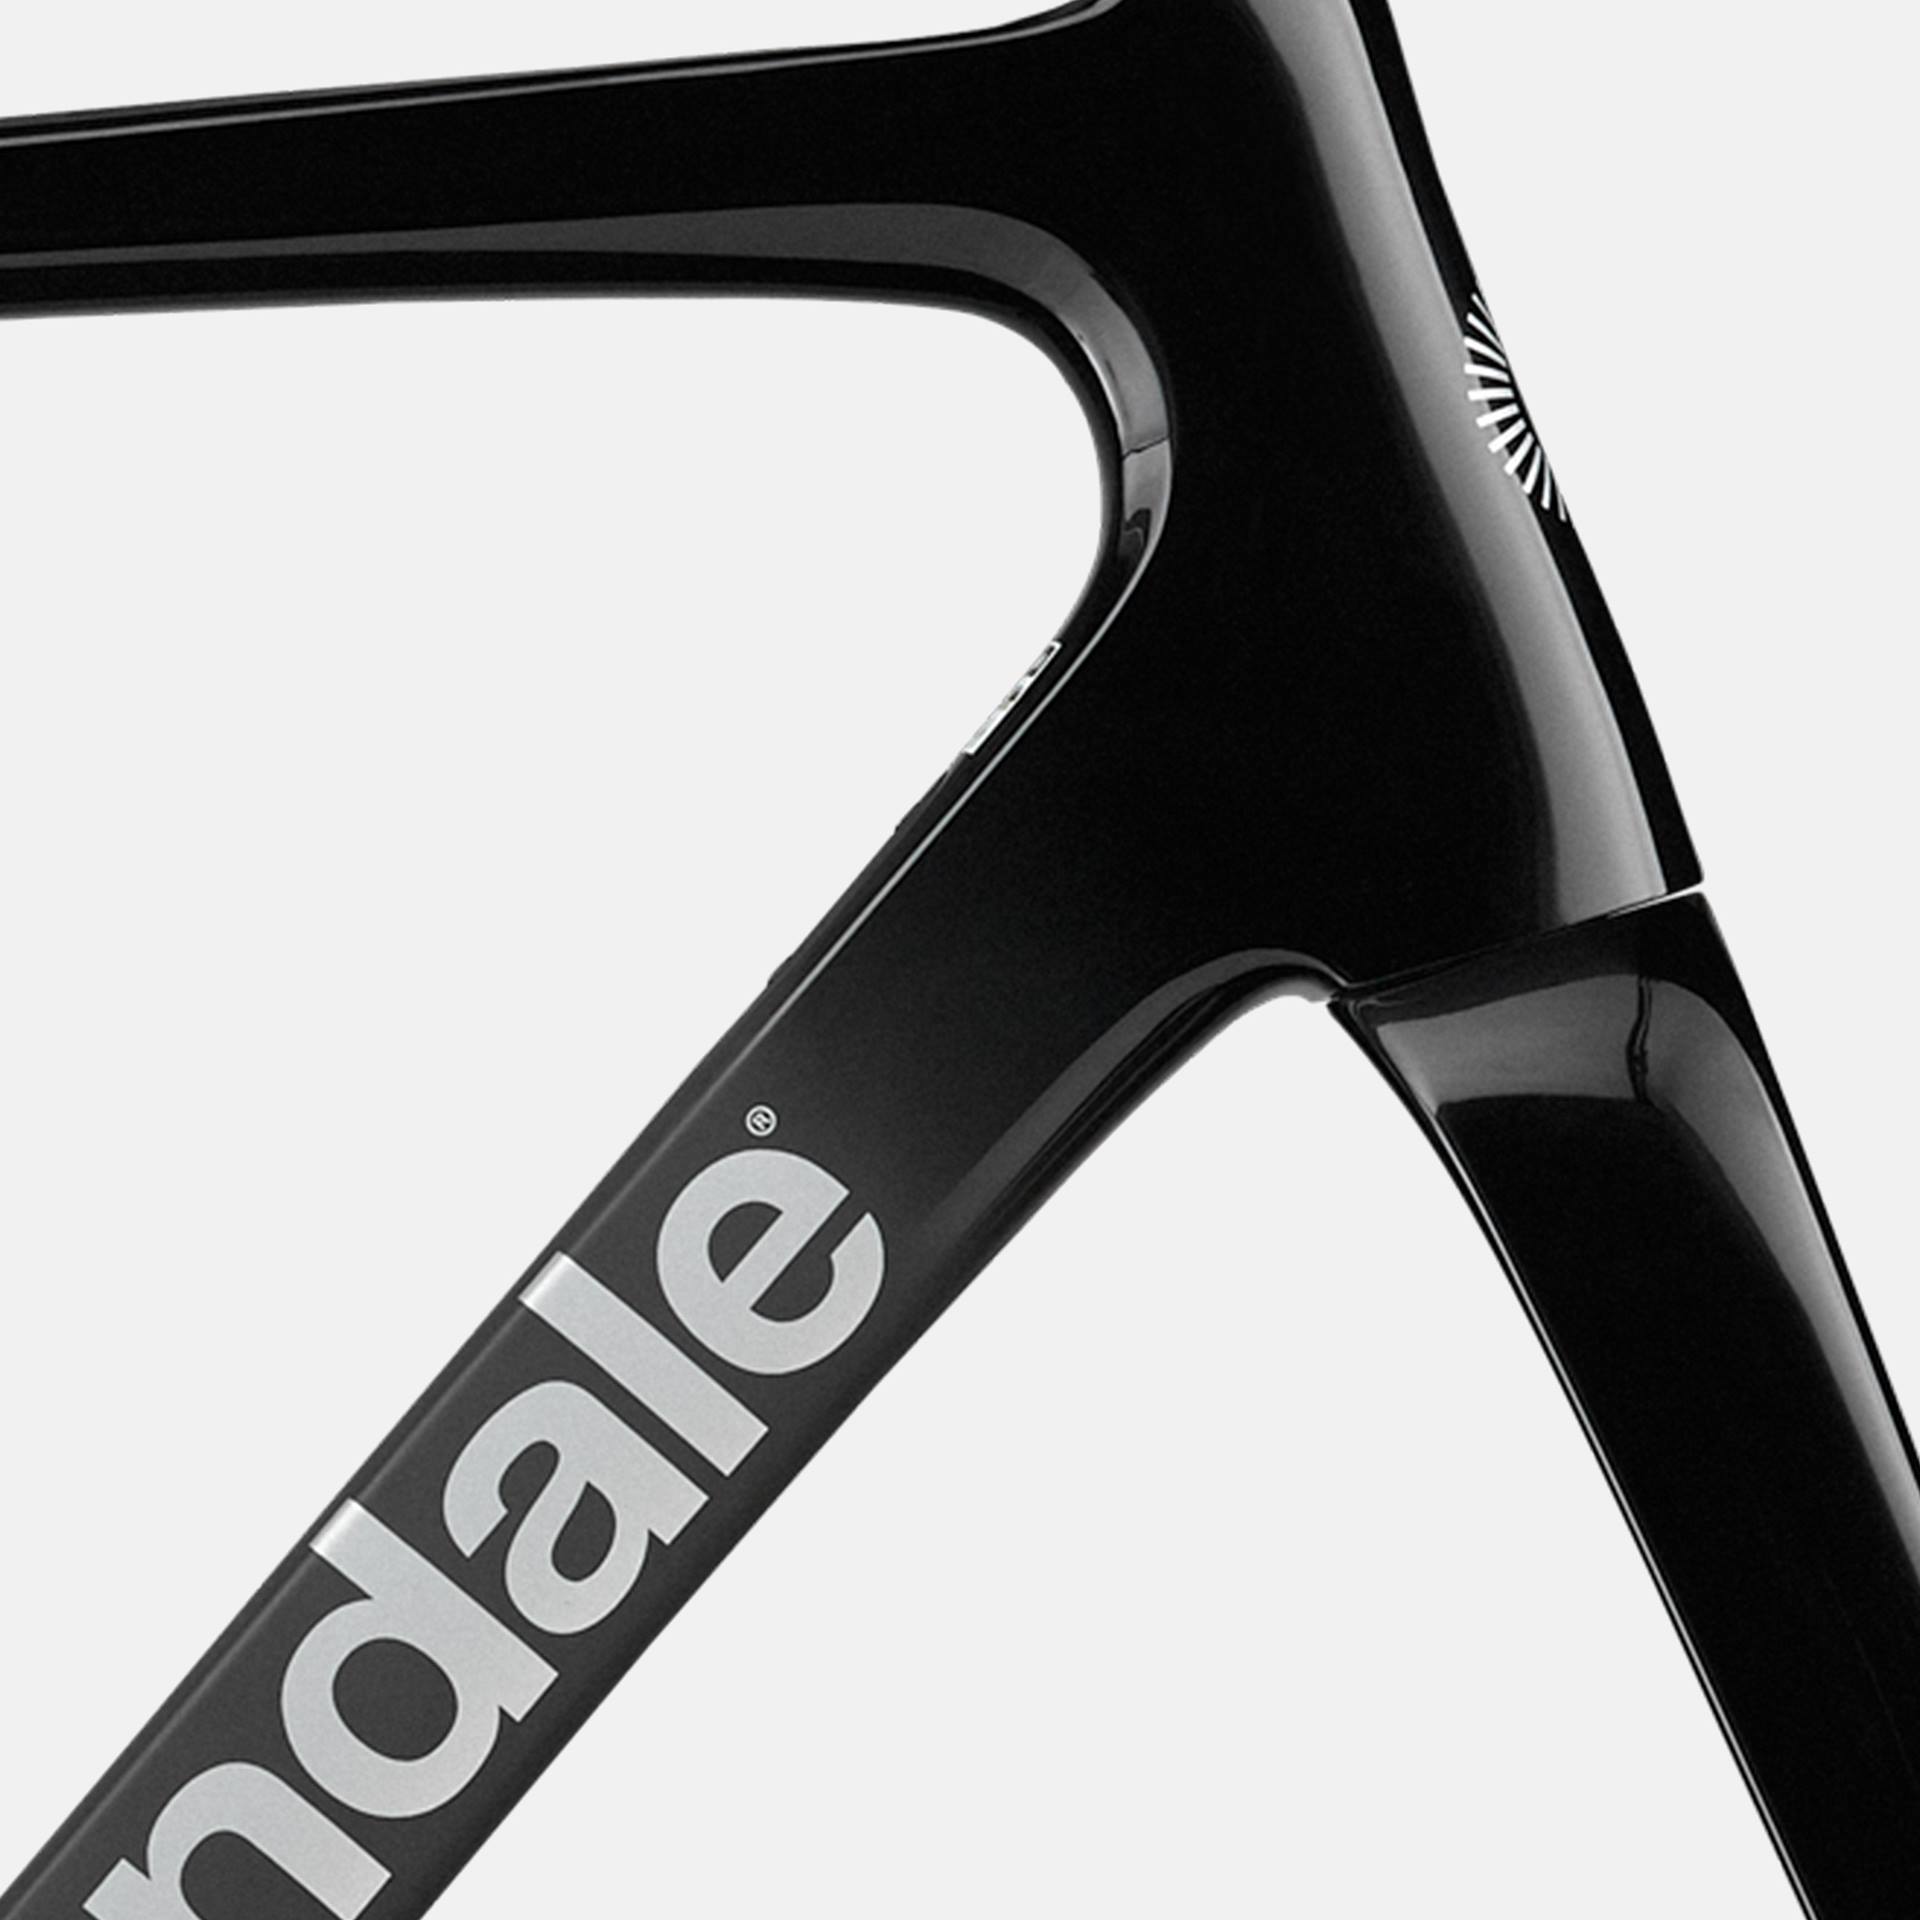 Here's every nerdy detail on Cannondale's fourth generation SuperSix Evo  frameset